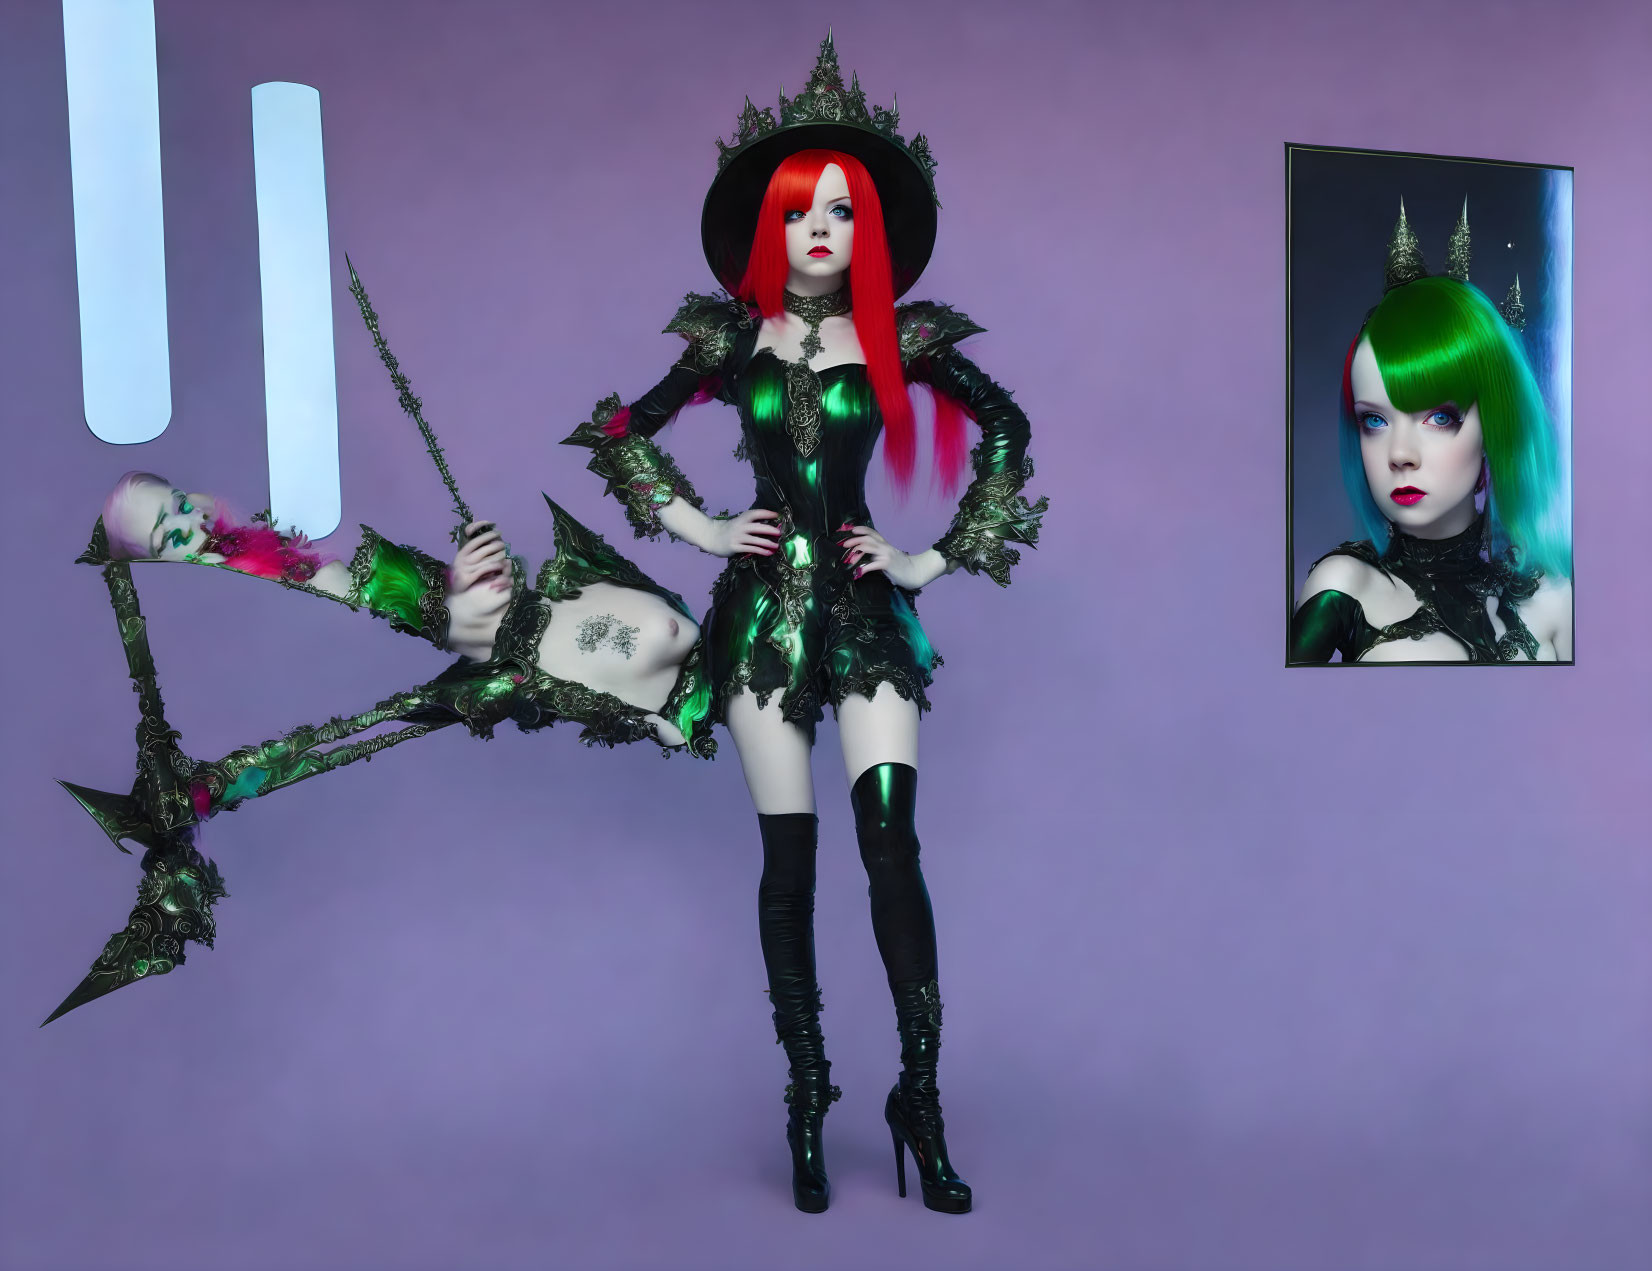 Stylized female character with red hair and scythe in gothic outfit